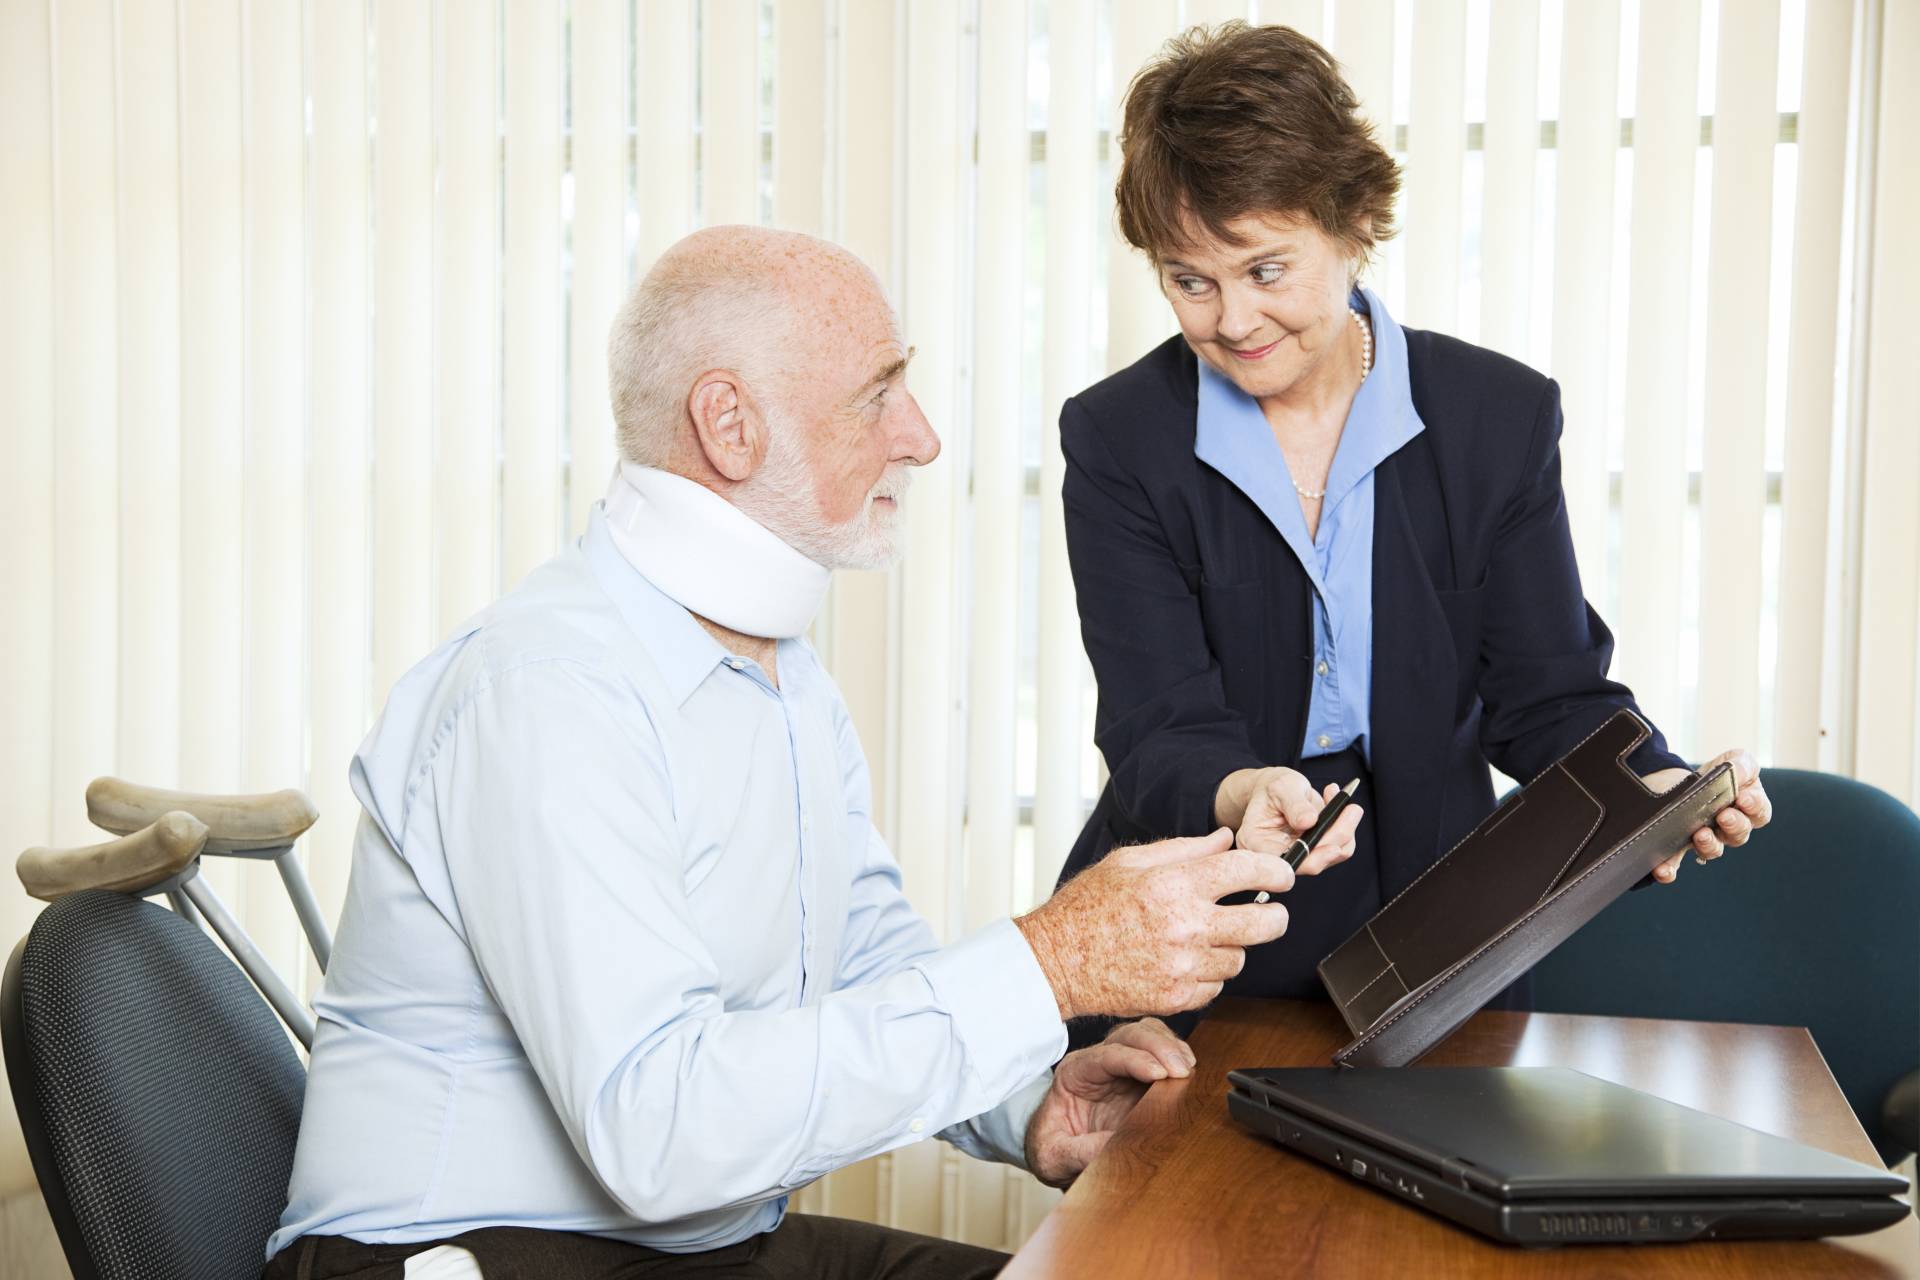 Schedule a free consultation with our personal injury lawyers.